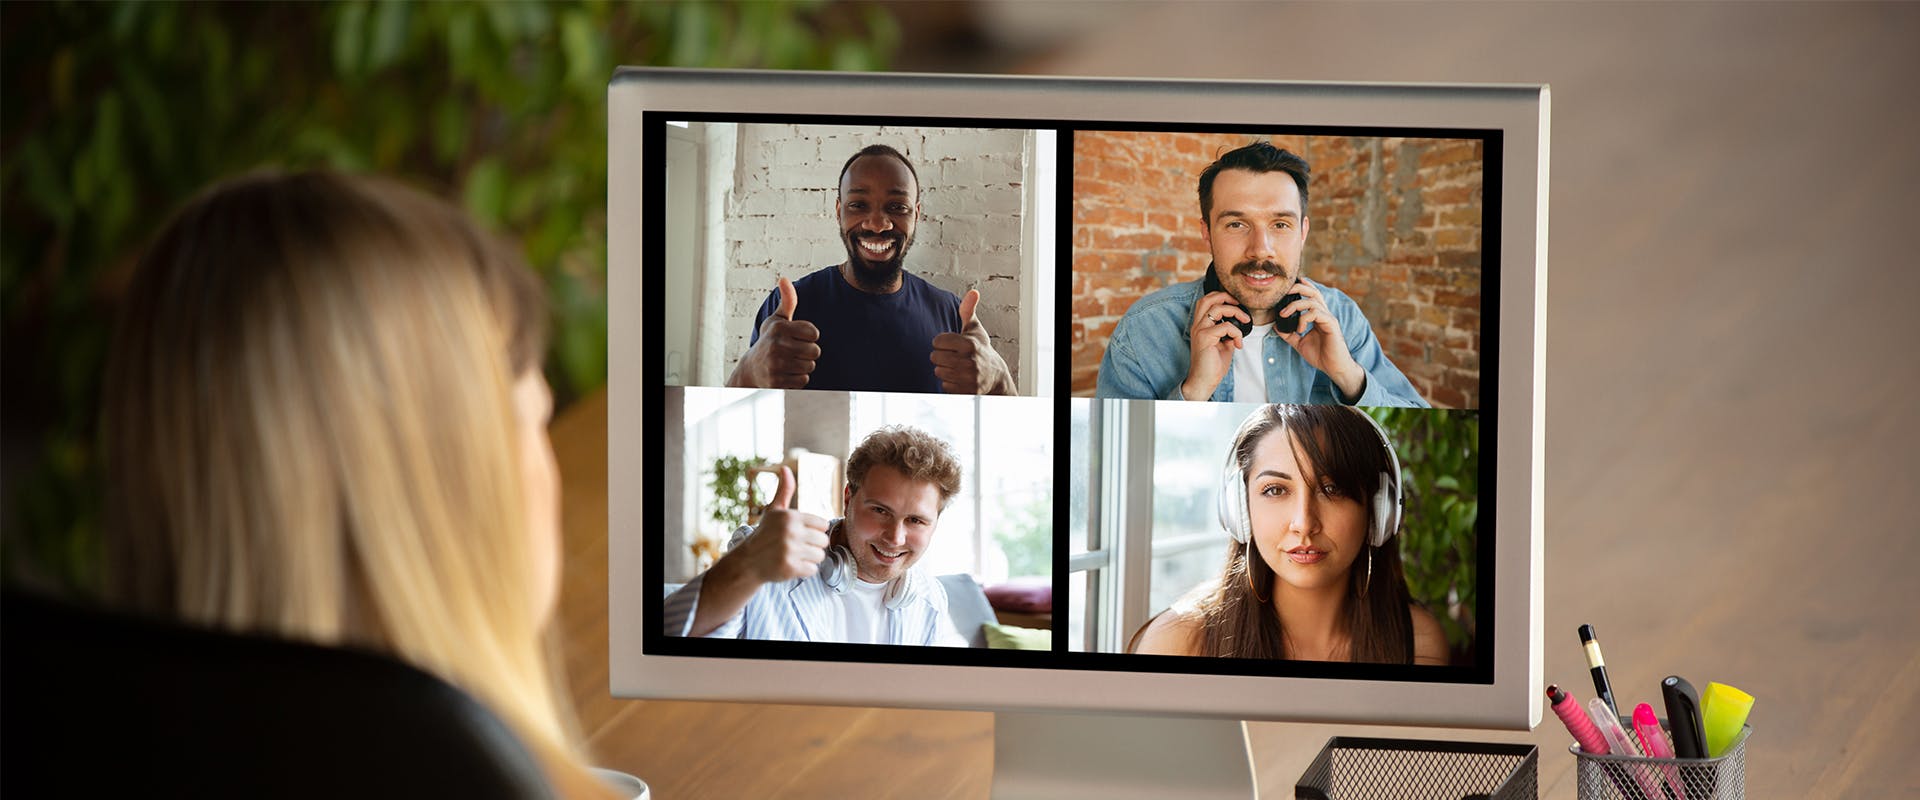 People on online meeting on LCD screen - Image for post How we use Discord for business purpose